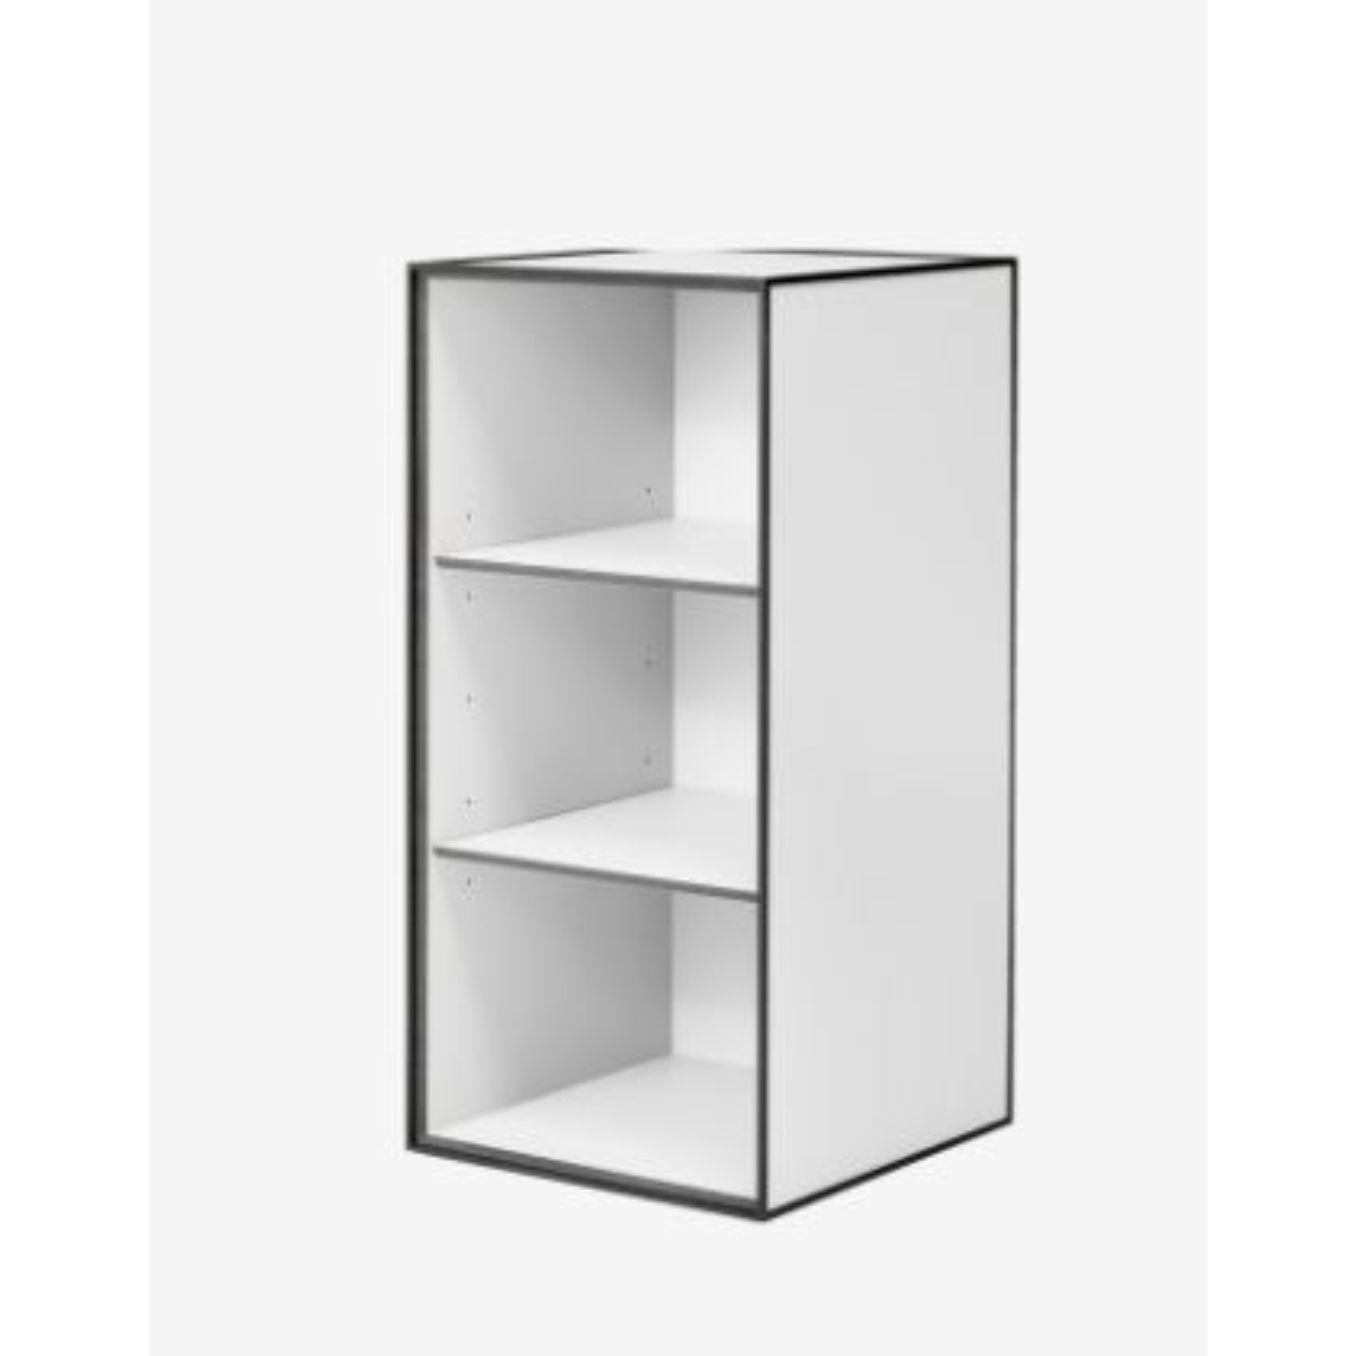 70 white frame box with 2 shelves by Lassen
Dimensions: D 35 x W 35 x H 70 cm 
Materials: Finér, Melamin, Melamin, Melamine, Metal, Veneer
Also available in different colors and dimensions. 
Weight: 13 Kg


By Lassen is a Danish design brand